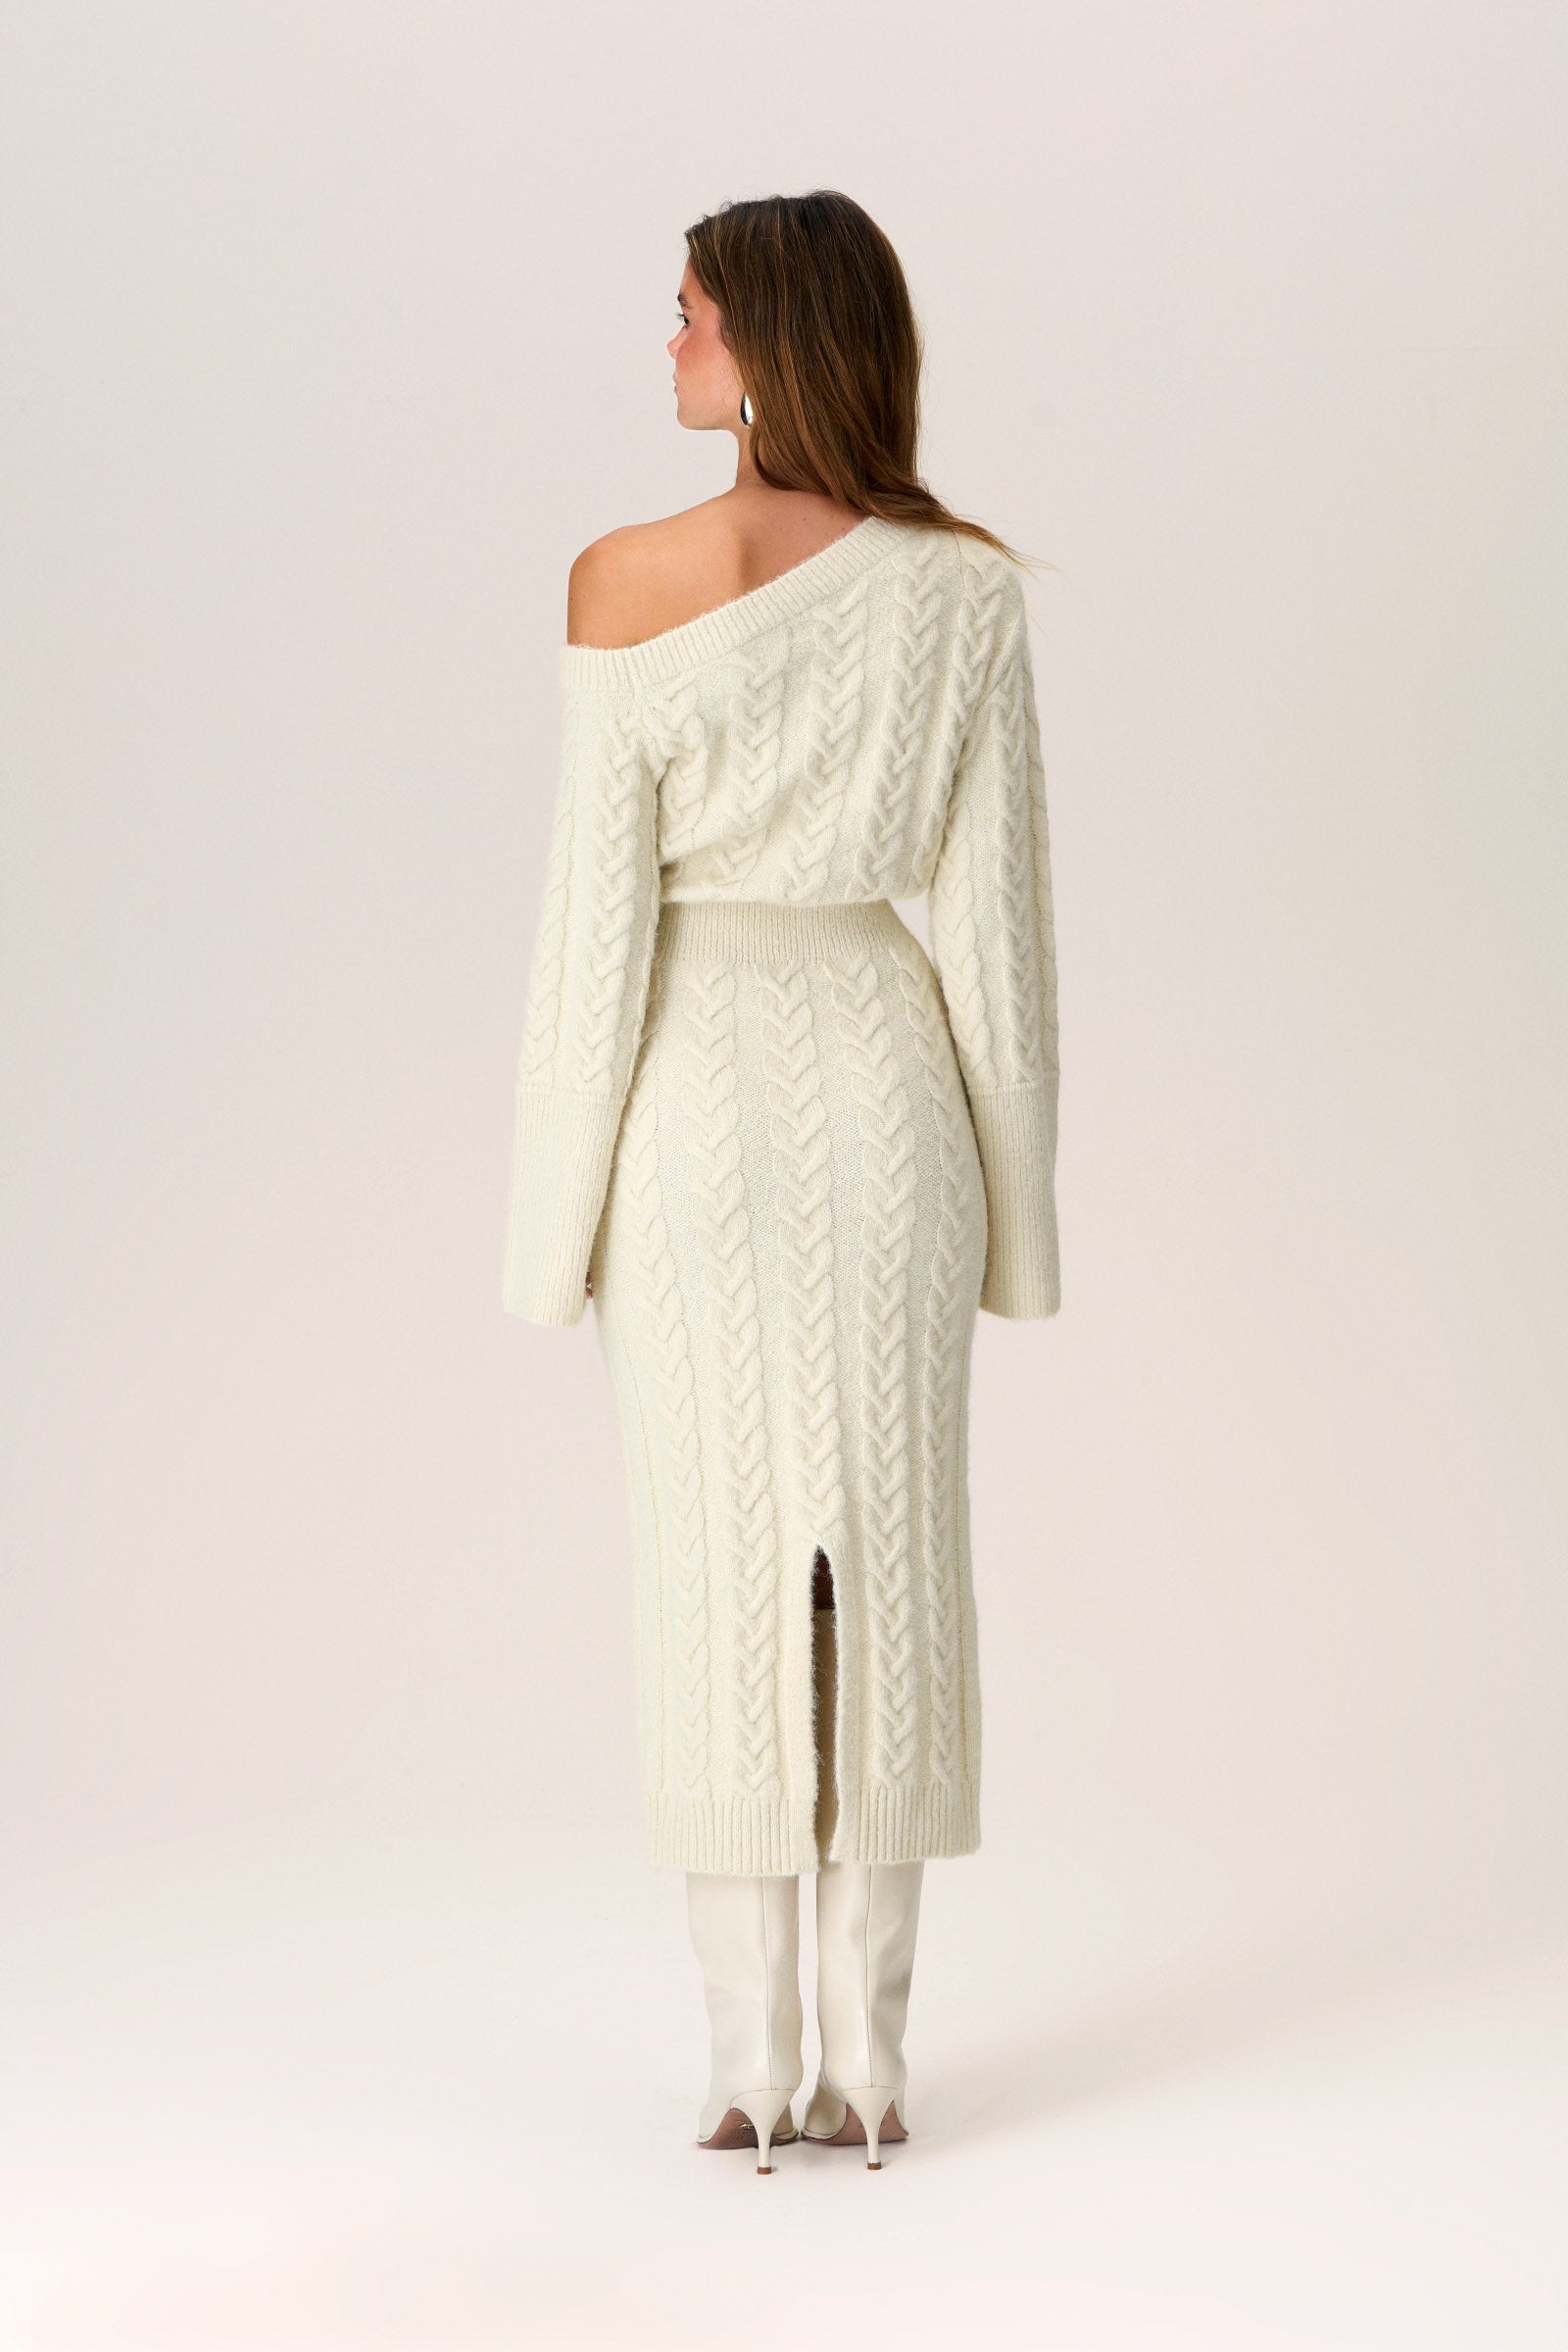 Shop Page – dresses – dresses - Knitted online women 2